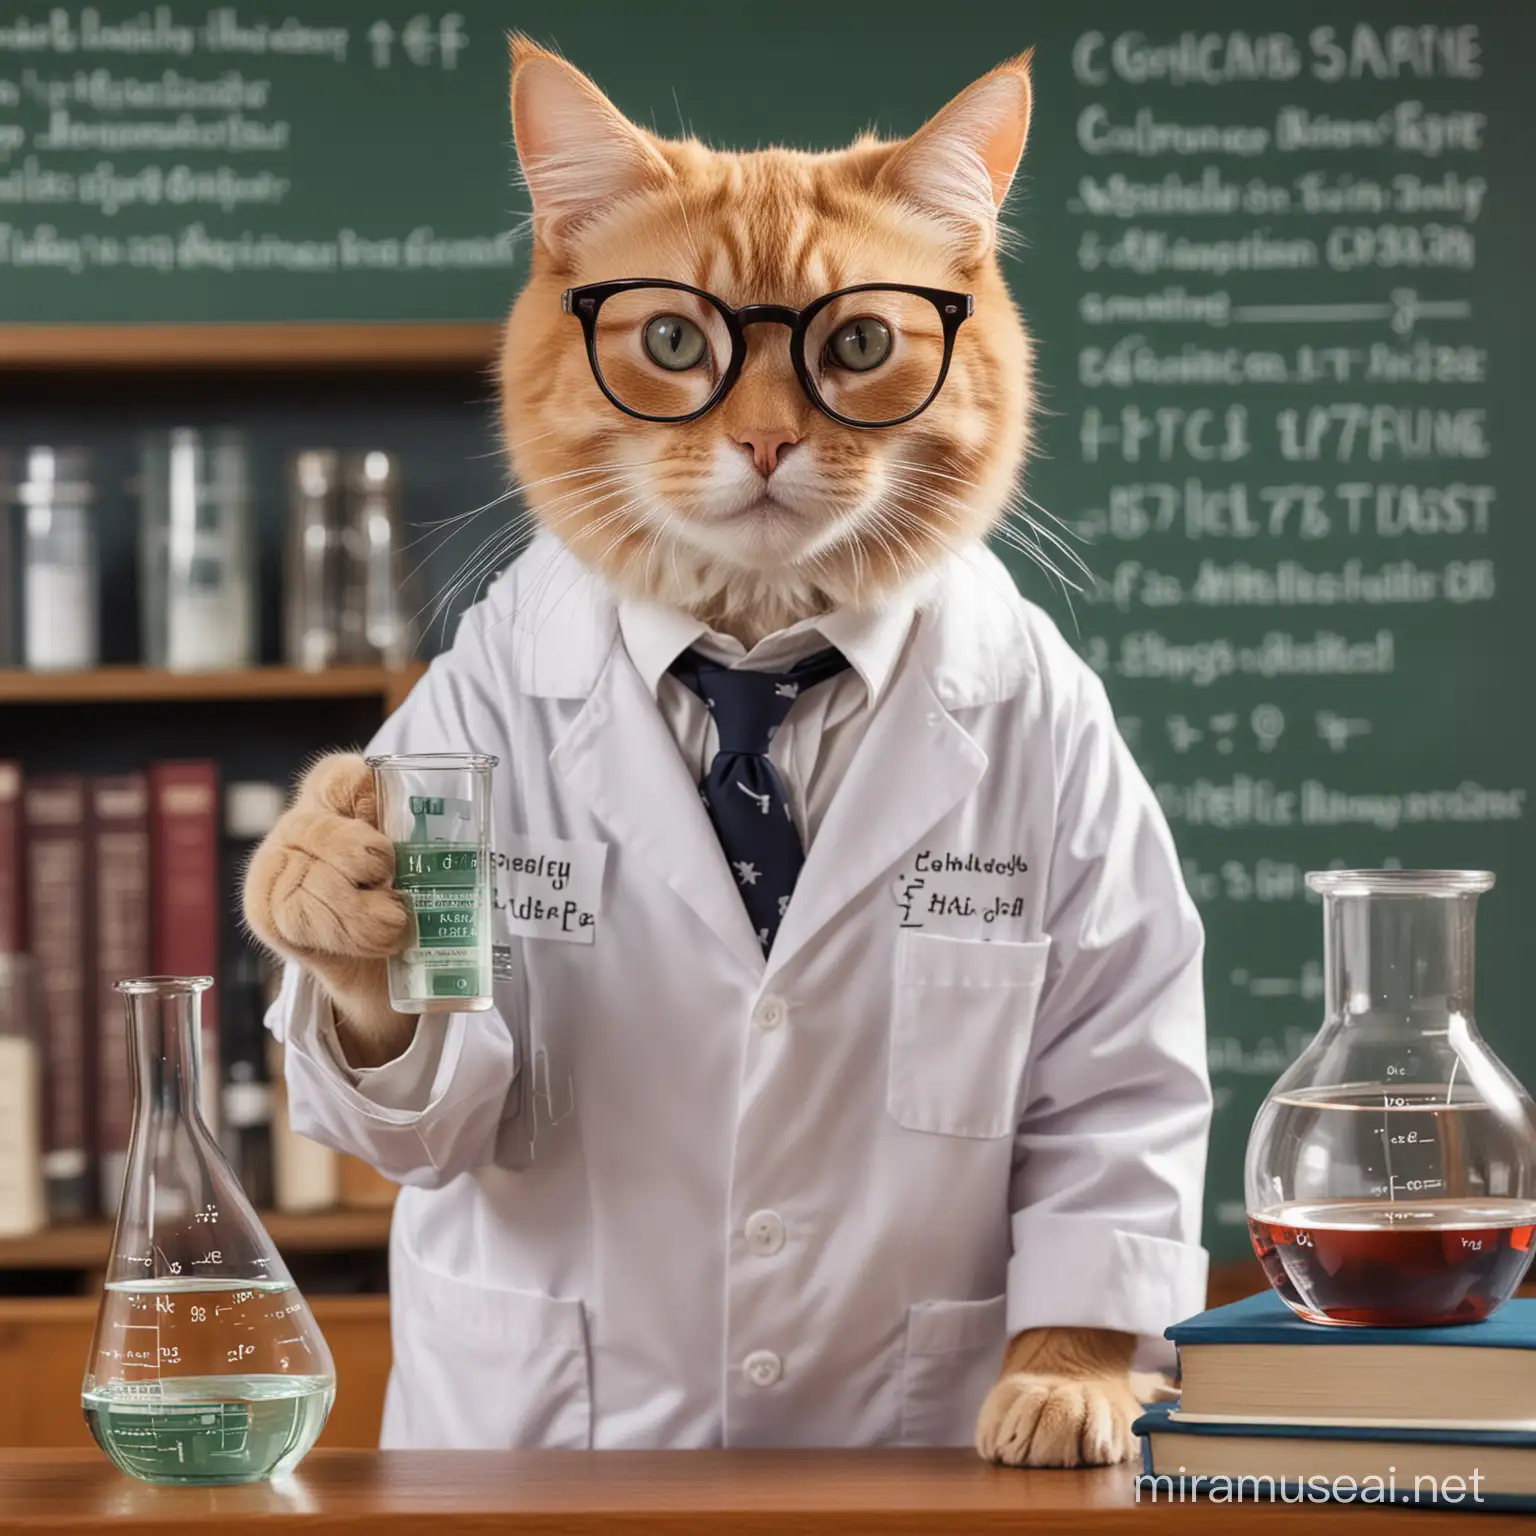 Scientist Cat Conducting Experiments with Nerd Glasses and Lab Coat